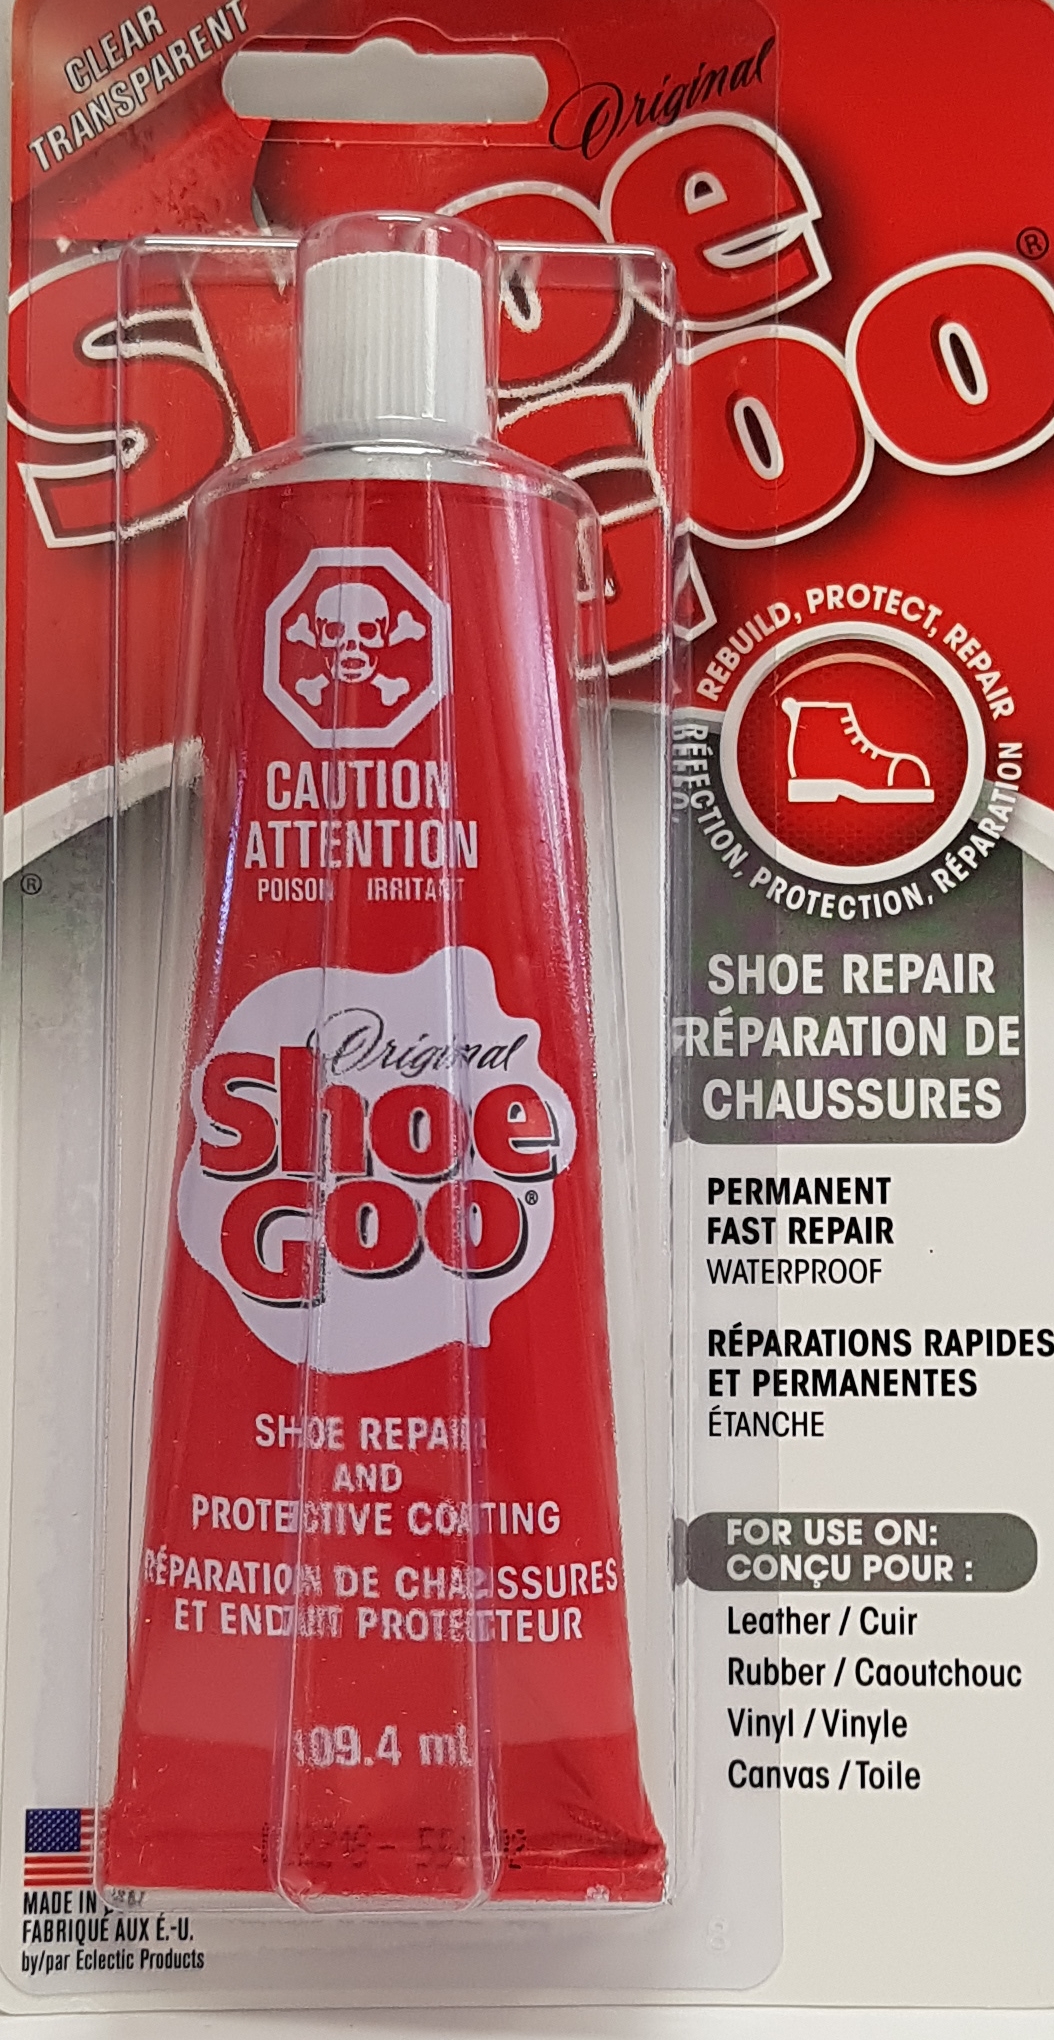 You guys ever use this instead if shoe goo? : r/NewSkaters